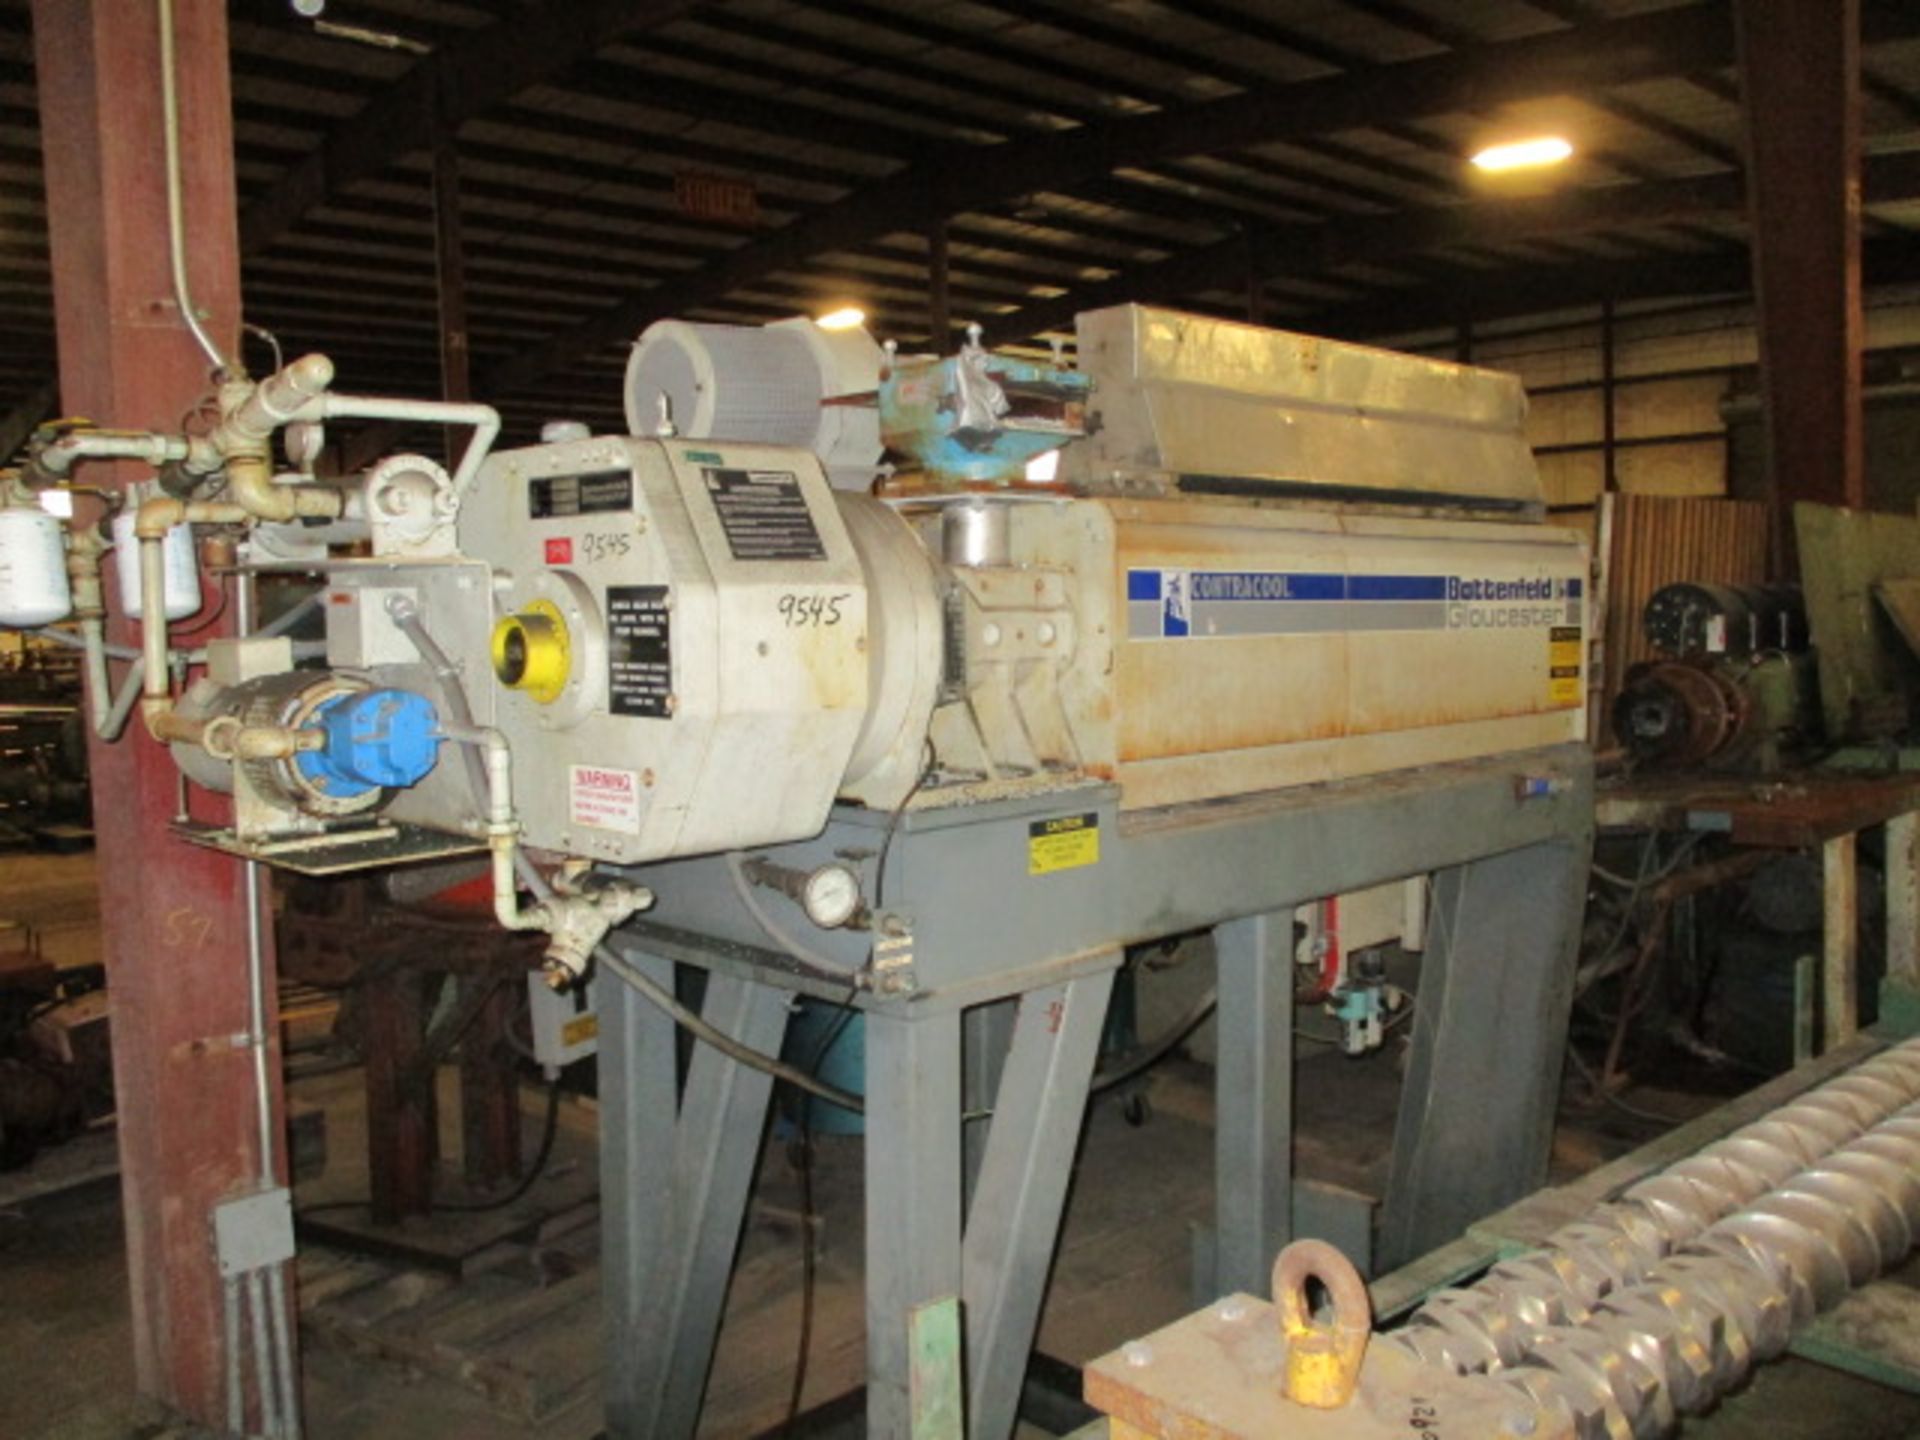 2.5" Gloucester model 25225R-2 extruder. Driven by 60 HP DC motor with SCR.